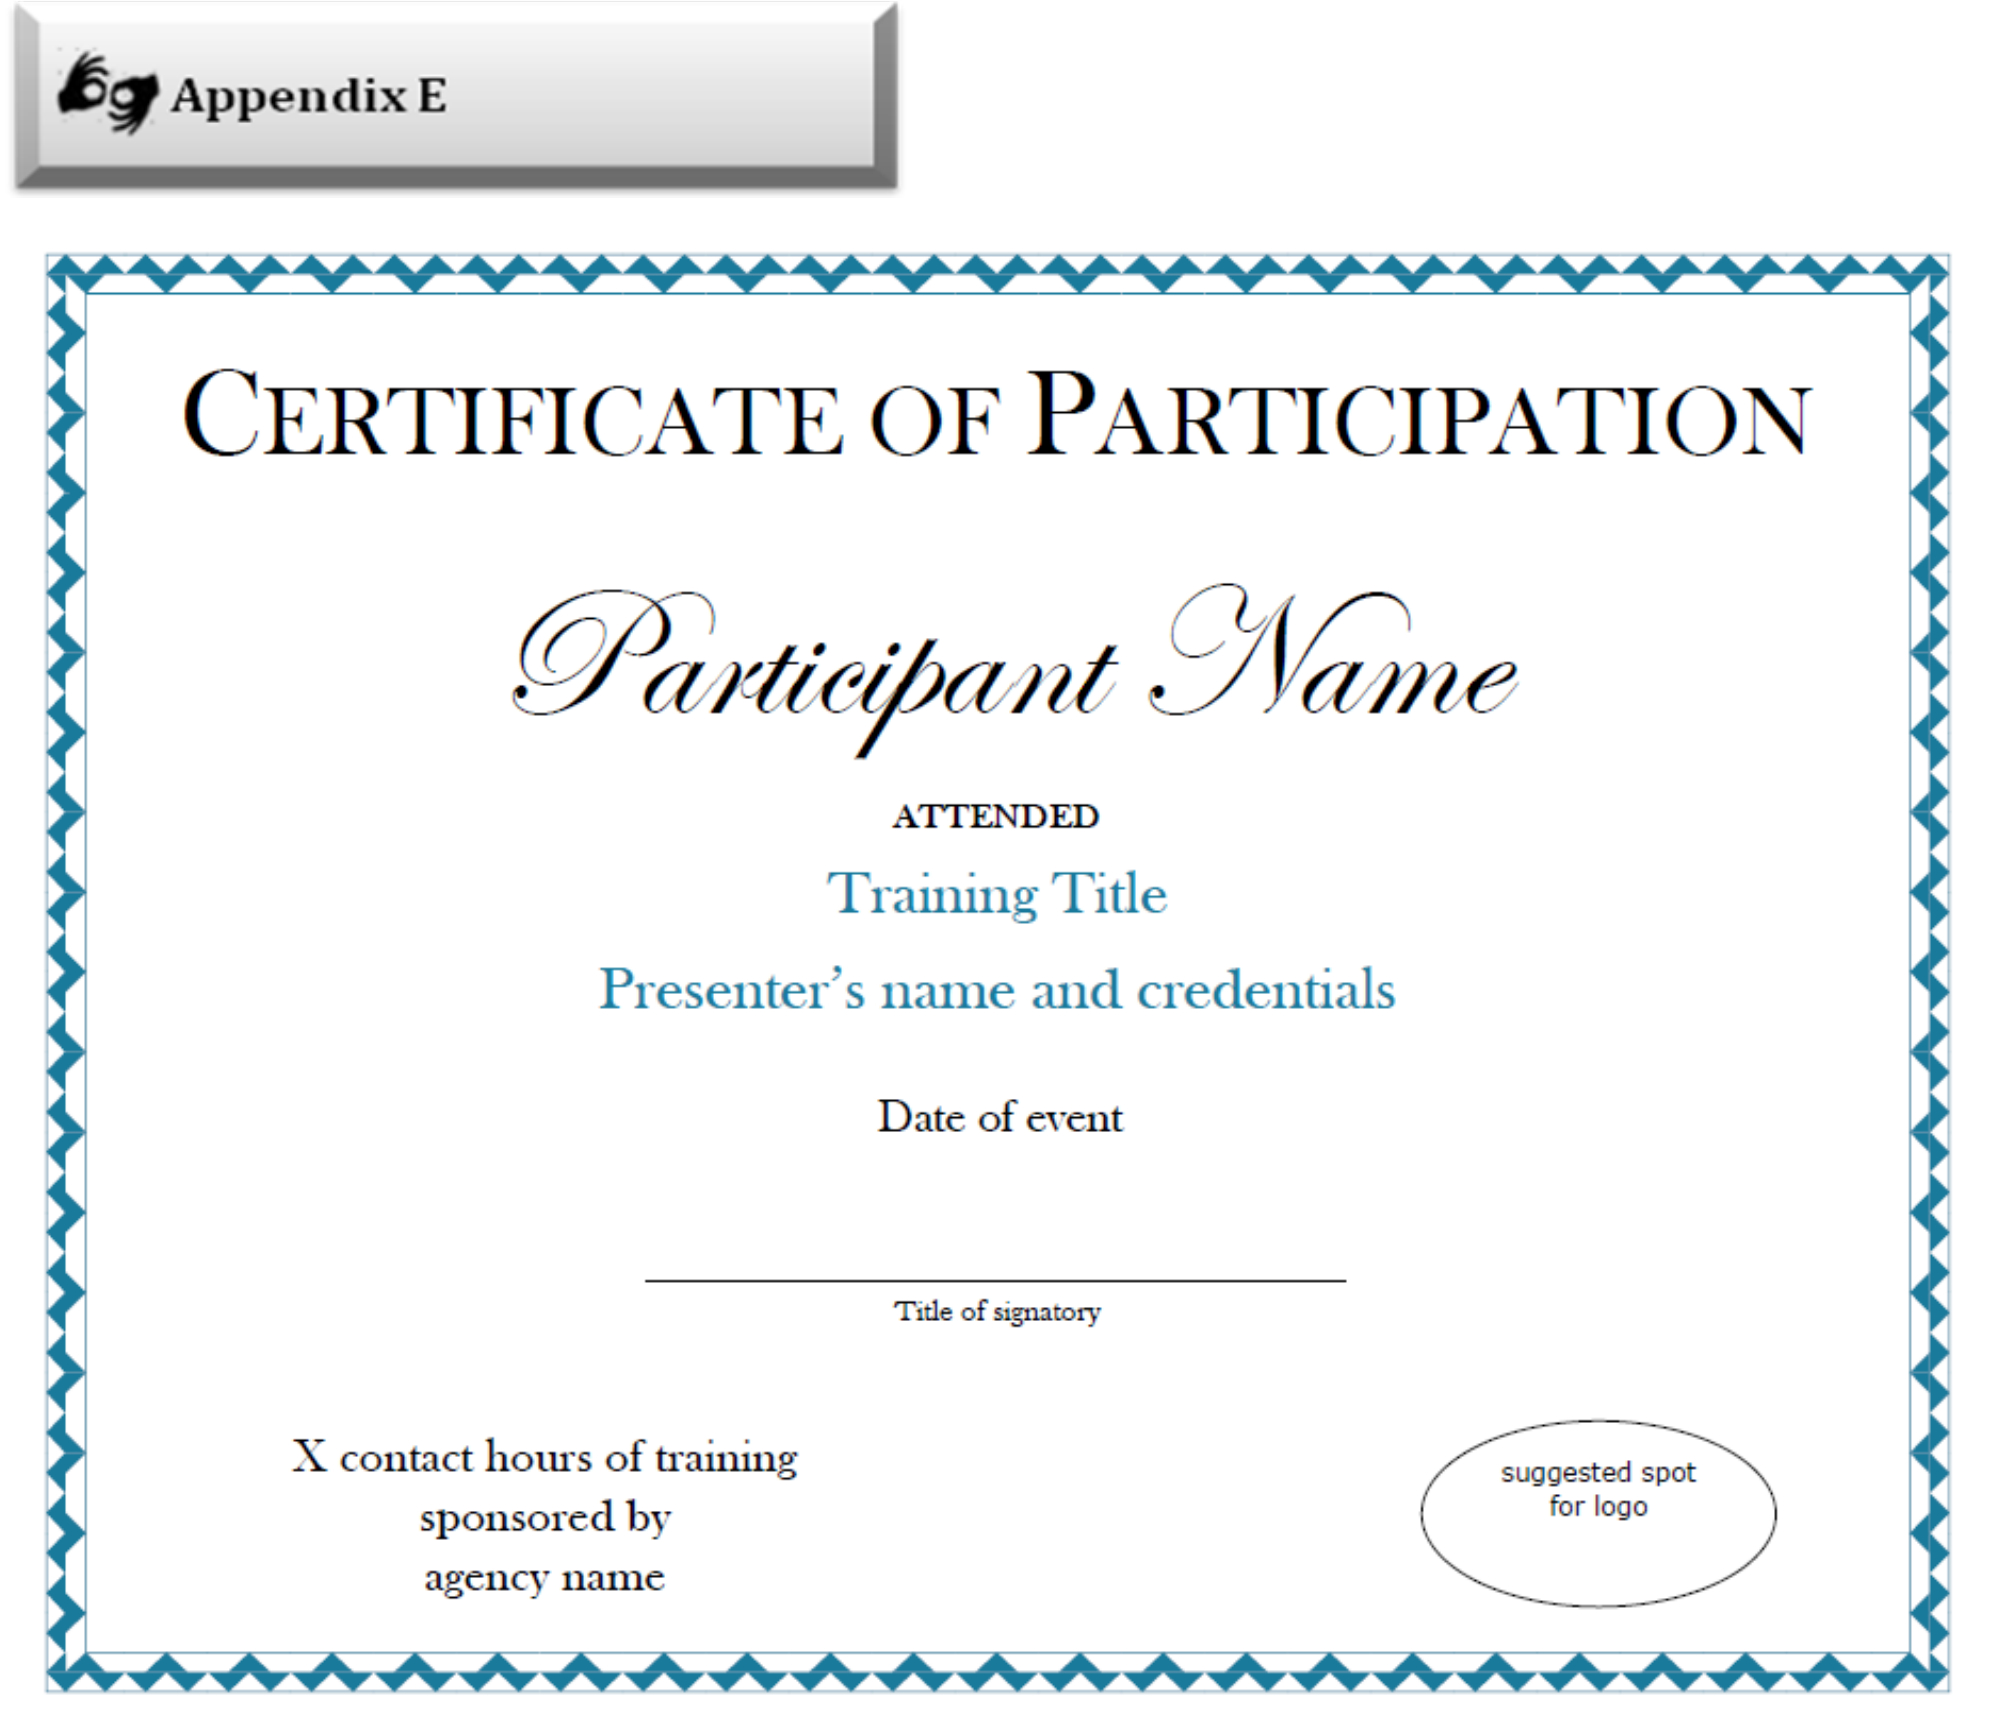 Certificate Of Participation Sample Free Download Intended For Certificate Of Participation Template Pdf